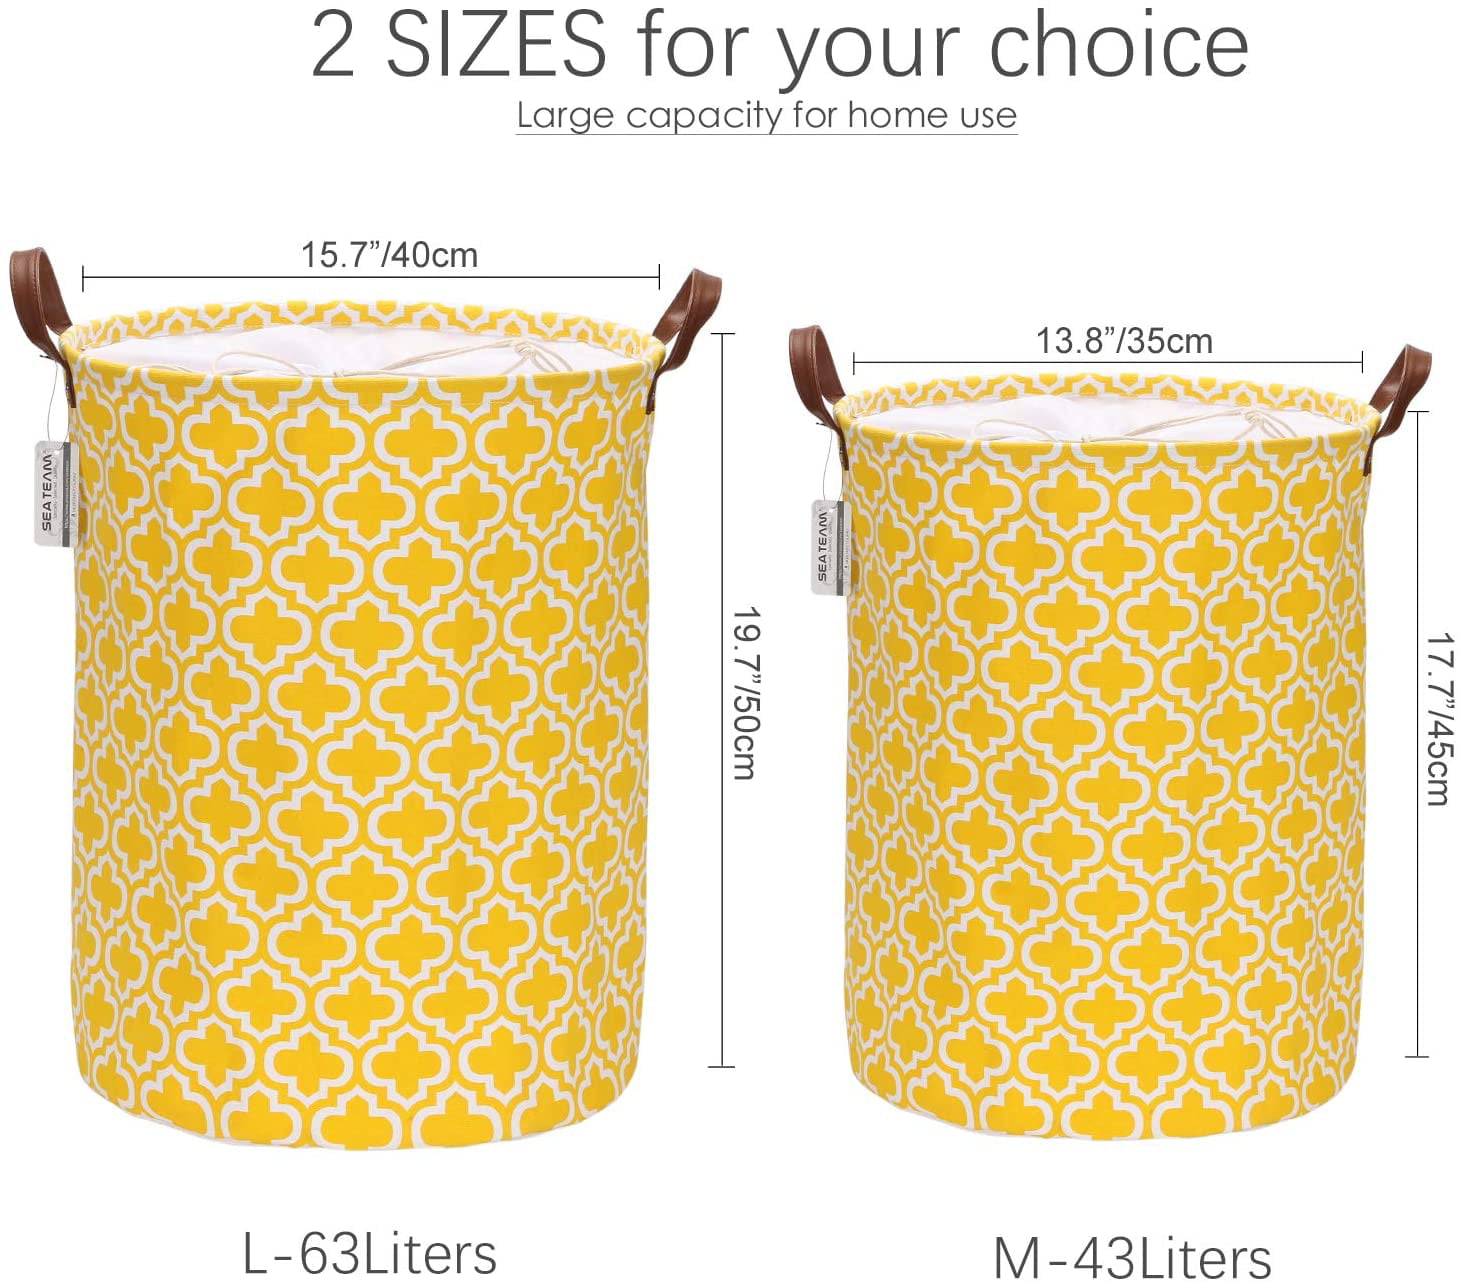 Waterproof Inner Sea Team Quatrefoil Pattern Laundry Hamper Canvas Fabric Laundry Basket Collapsible Storage Bin with PU Leather Handles and Drawstring Closure Aqua 17.7 by 13.8 inches 